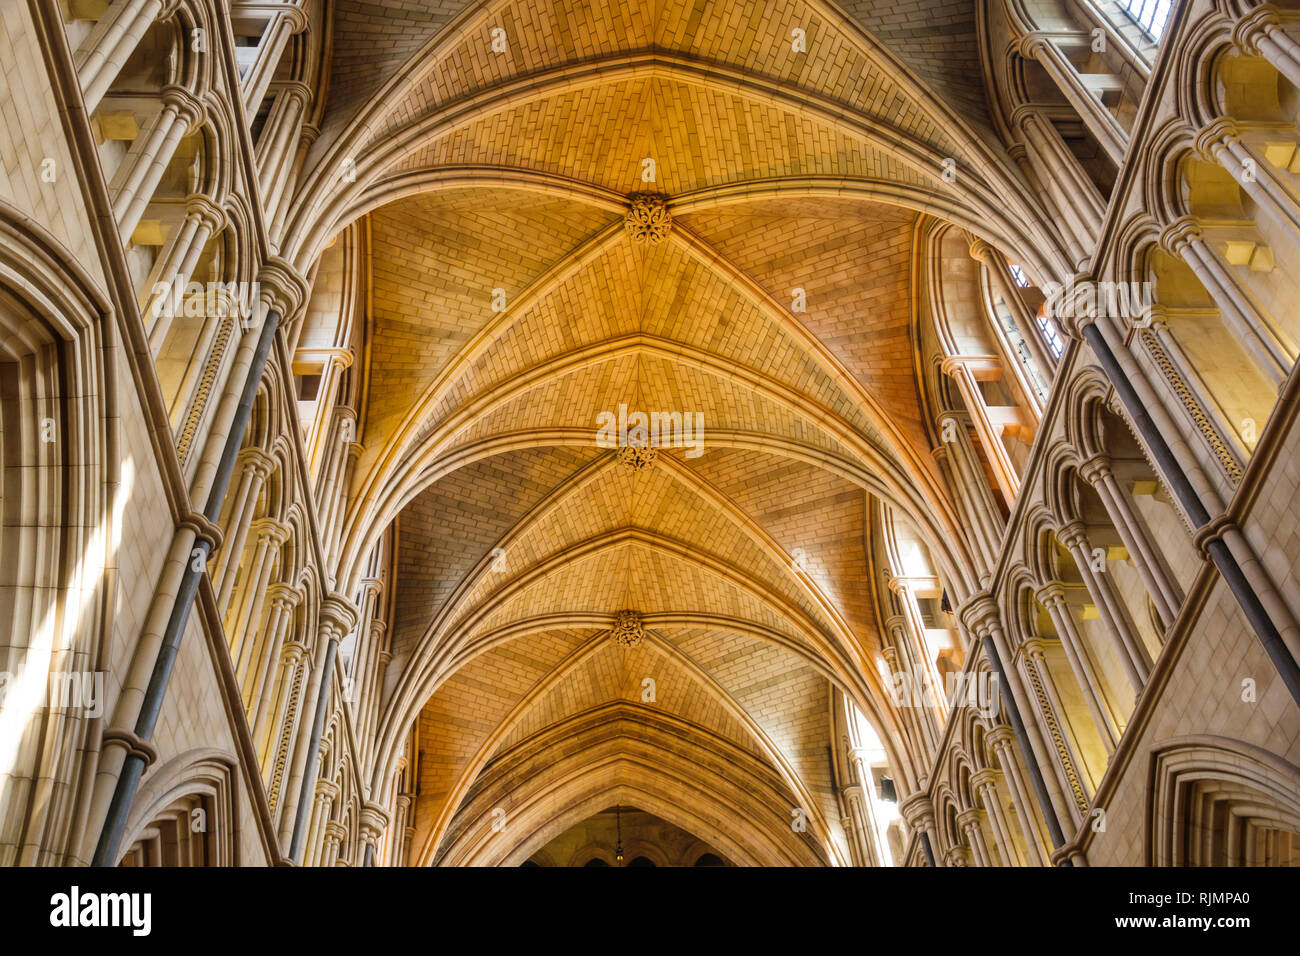 United Kingdom Great Britain England London South Bank Southwark Southwark Cathedral Christian Anglican Diocese church nave vaulted ceiling Got Stock Photo